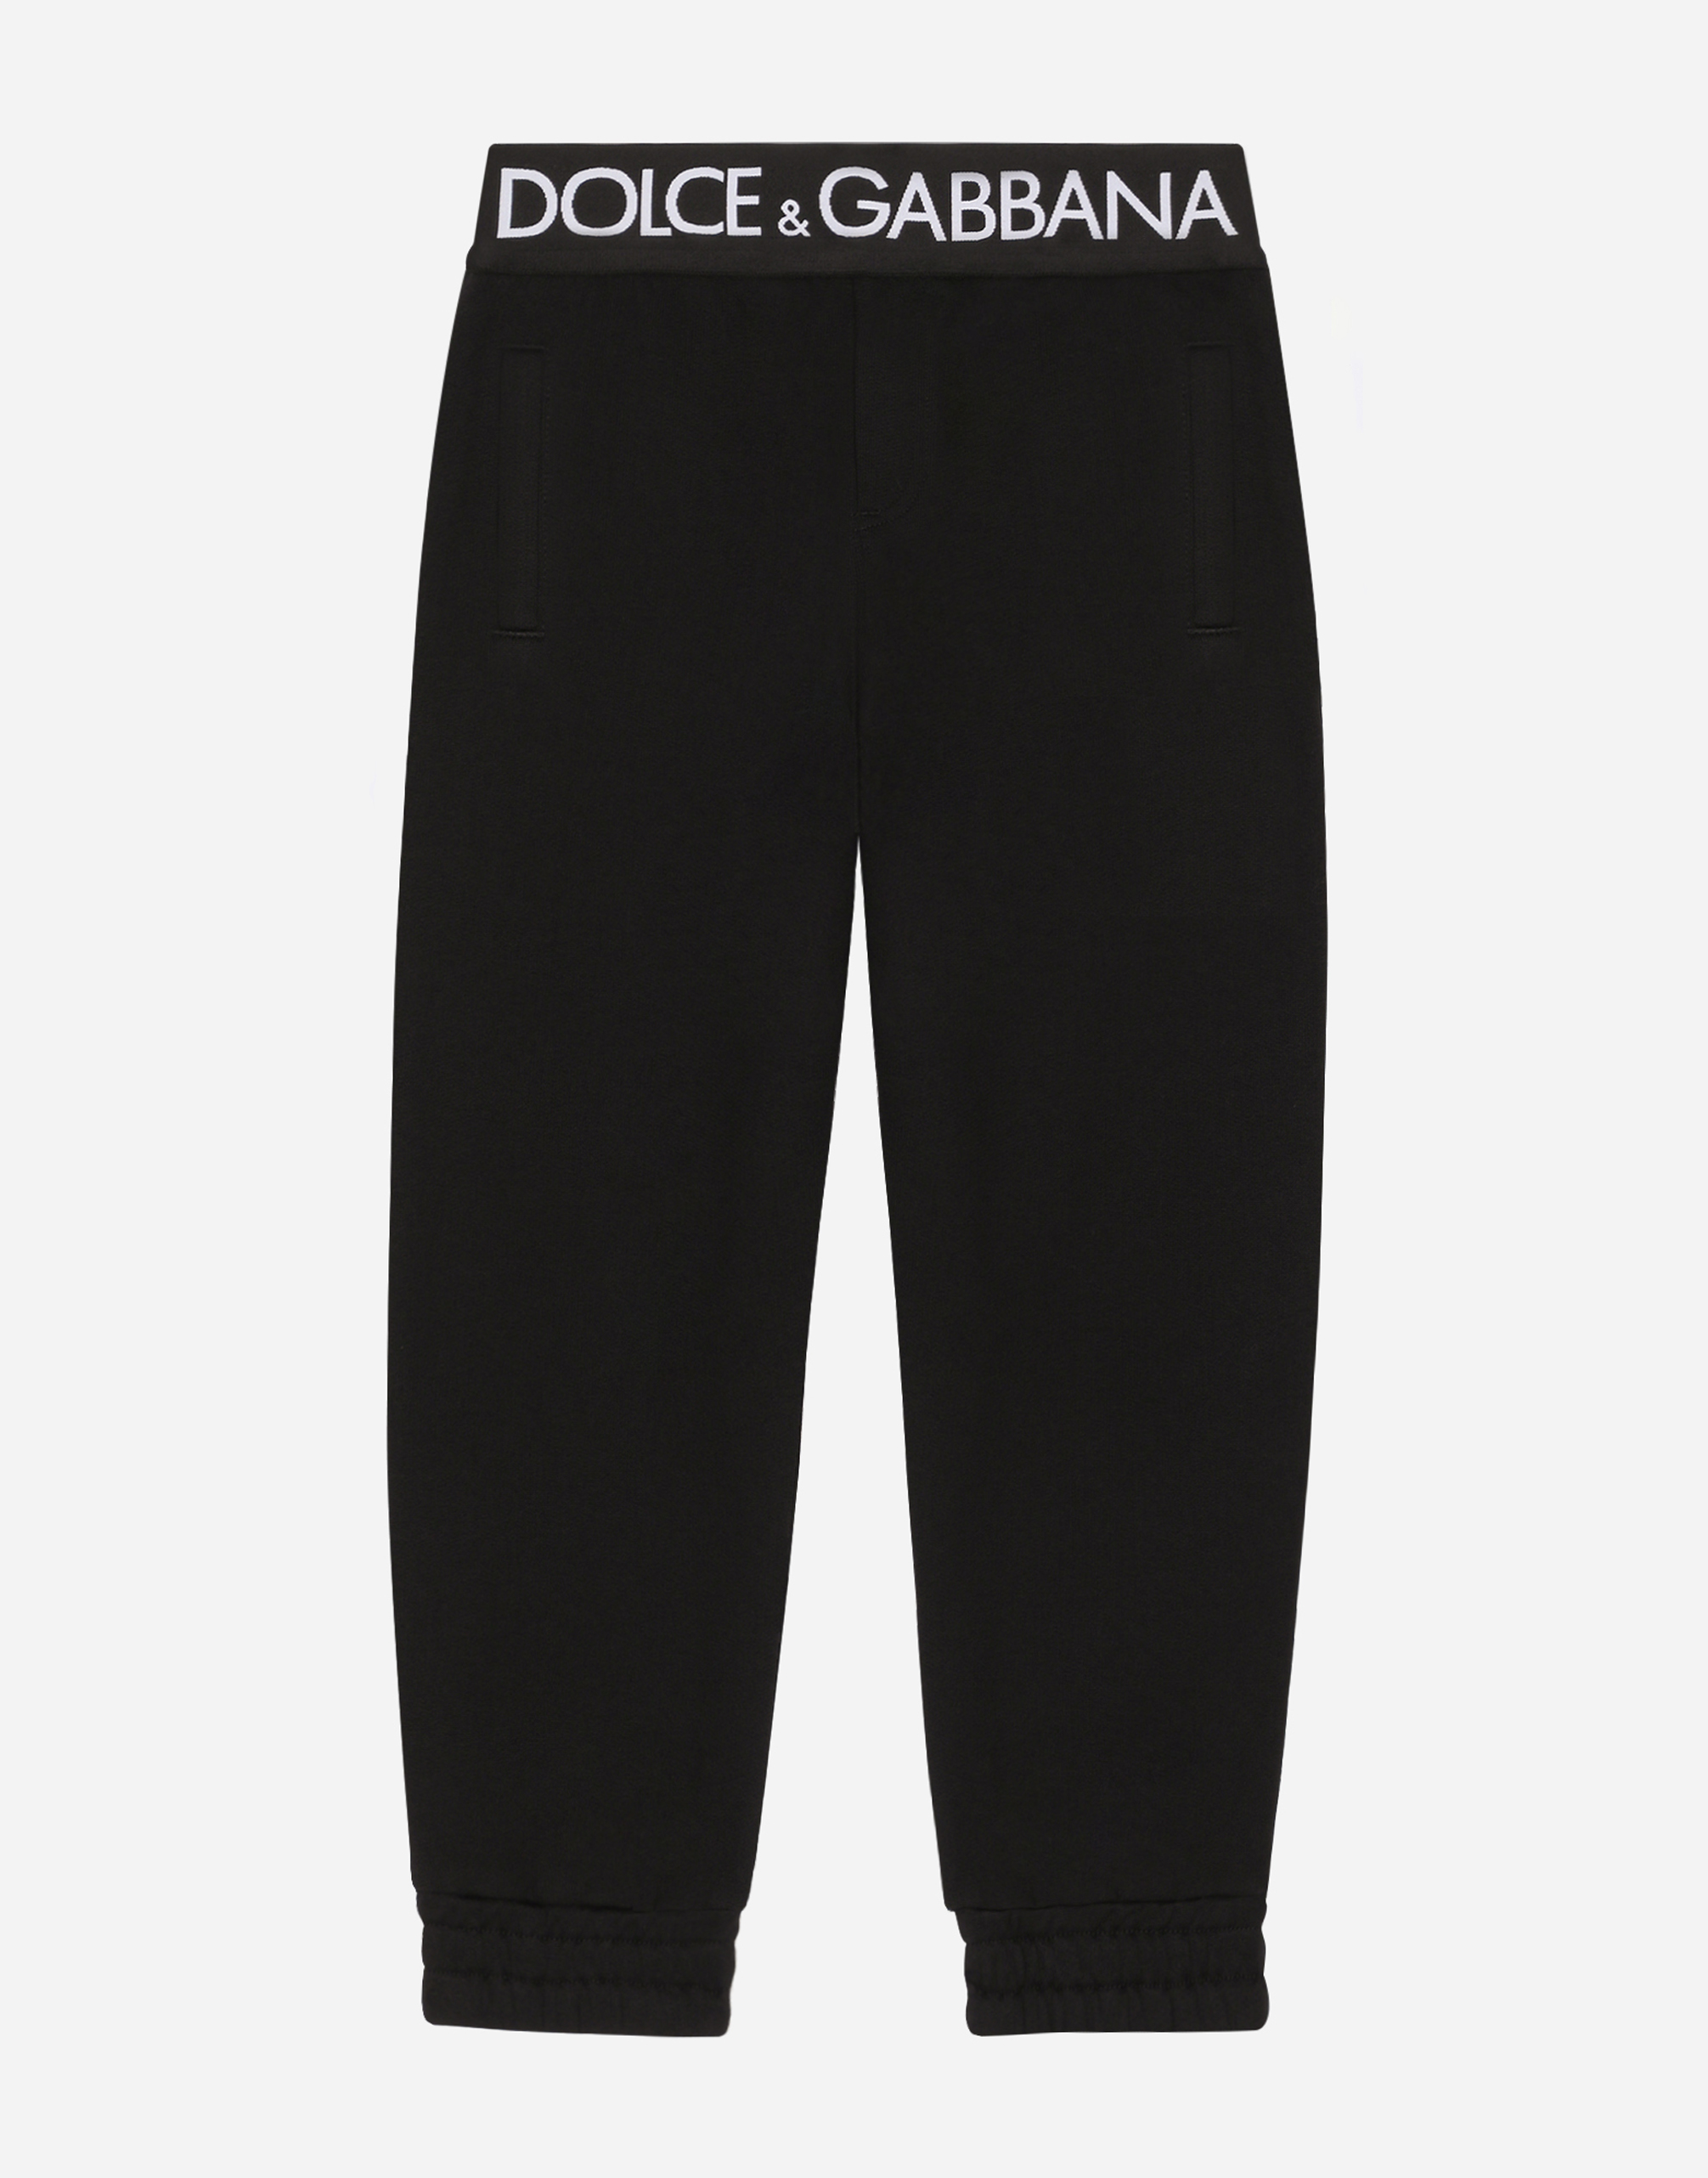 Dolce & Gabbana Kids' Jersey Jogging Trousers With Branded Elastic In Black